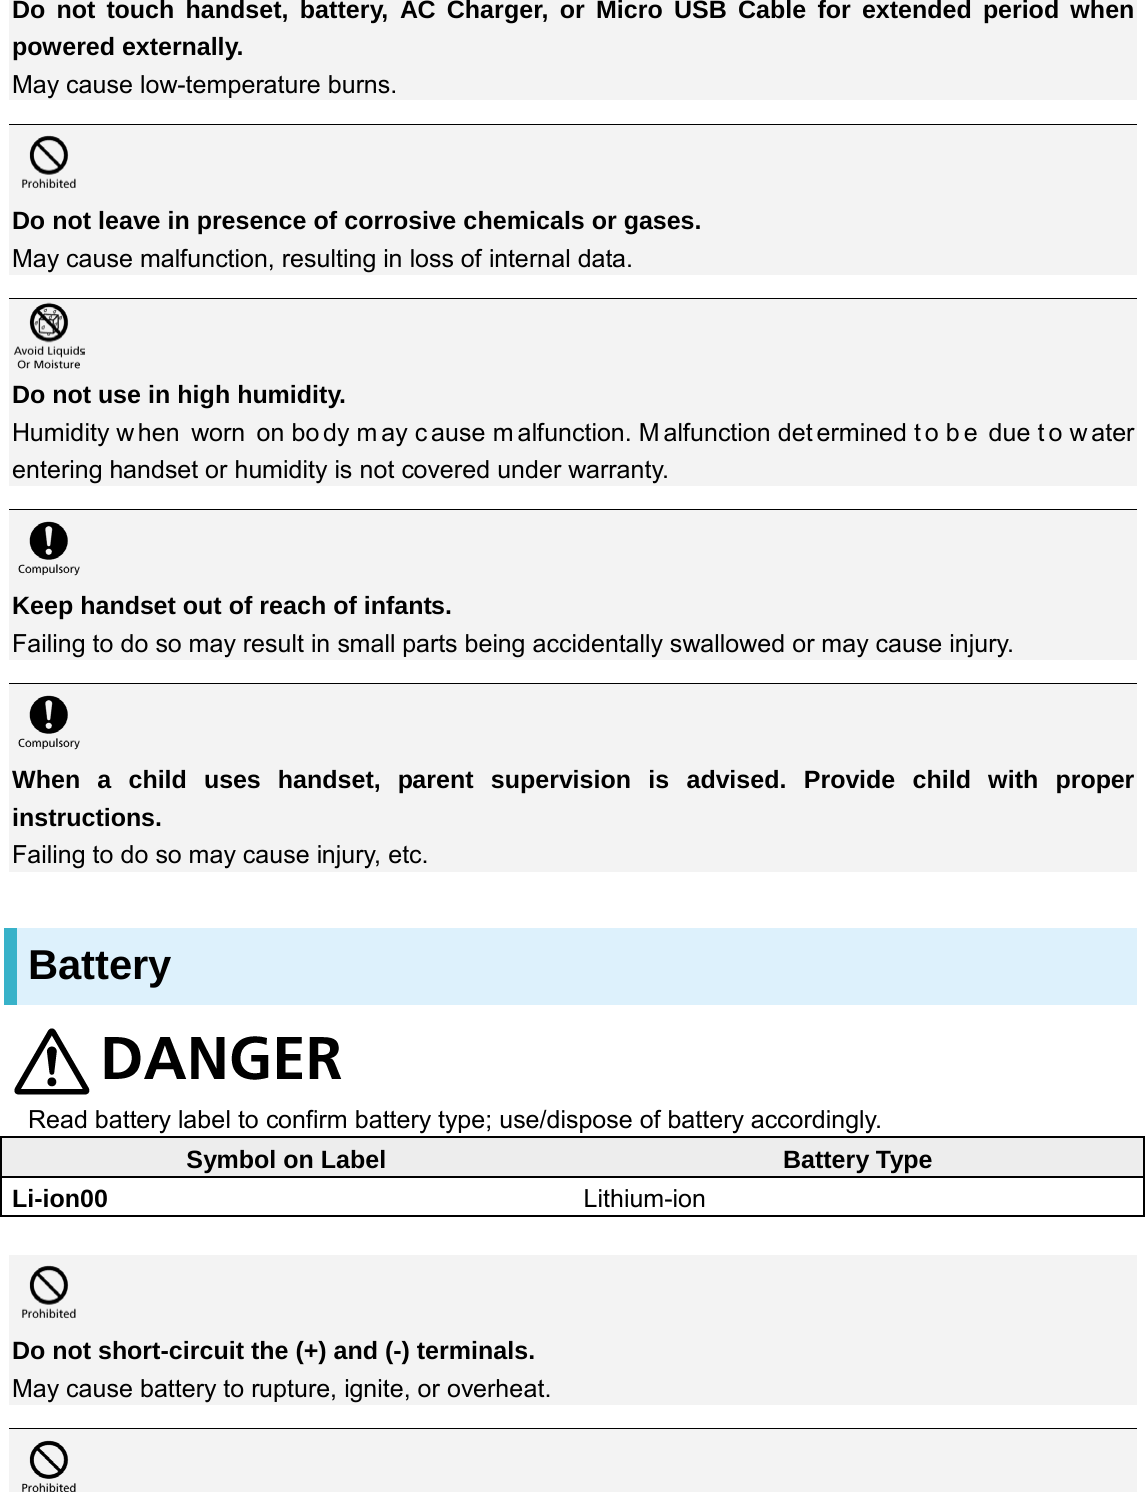 Do not touch handset, battery, AC Charger, or Micro USB Cable for extended period when powered externally. May cause low-temperature burns.   Do not leave in presence of corrosive chemicals or gases. May cause malfunction, resulting in loss of internal data.   Do not use in high humidity. Humidity w hen worn on bo dy m ay c ause m alfunction. M alfunction det ermined t o b e due t o w ater entering handset or humidity is not covered under warranty.   Keep handset out of reach of infants. Failing to do so may result in small parts being accidentally swallowed or may cause injury.   When a child uses handset, parent supervision is advised. Provide child with proper instructions.   Failing to do so may cause injury, etc. Battery  Read battery label to confirm battery type; use/dispose of battery accordingly. Symbol on Label Battery Type Li-ion00 Lithium-ion   Do not short-circuit the (+) and (-) terminals. May cause battery to rupture, ignite, or overheat.   